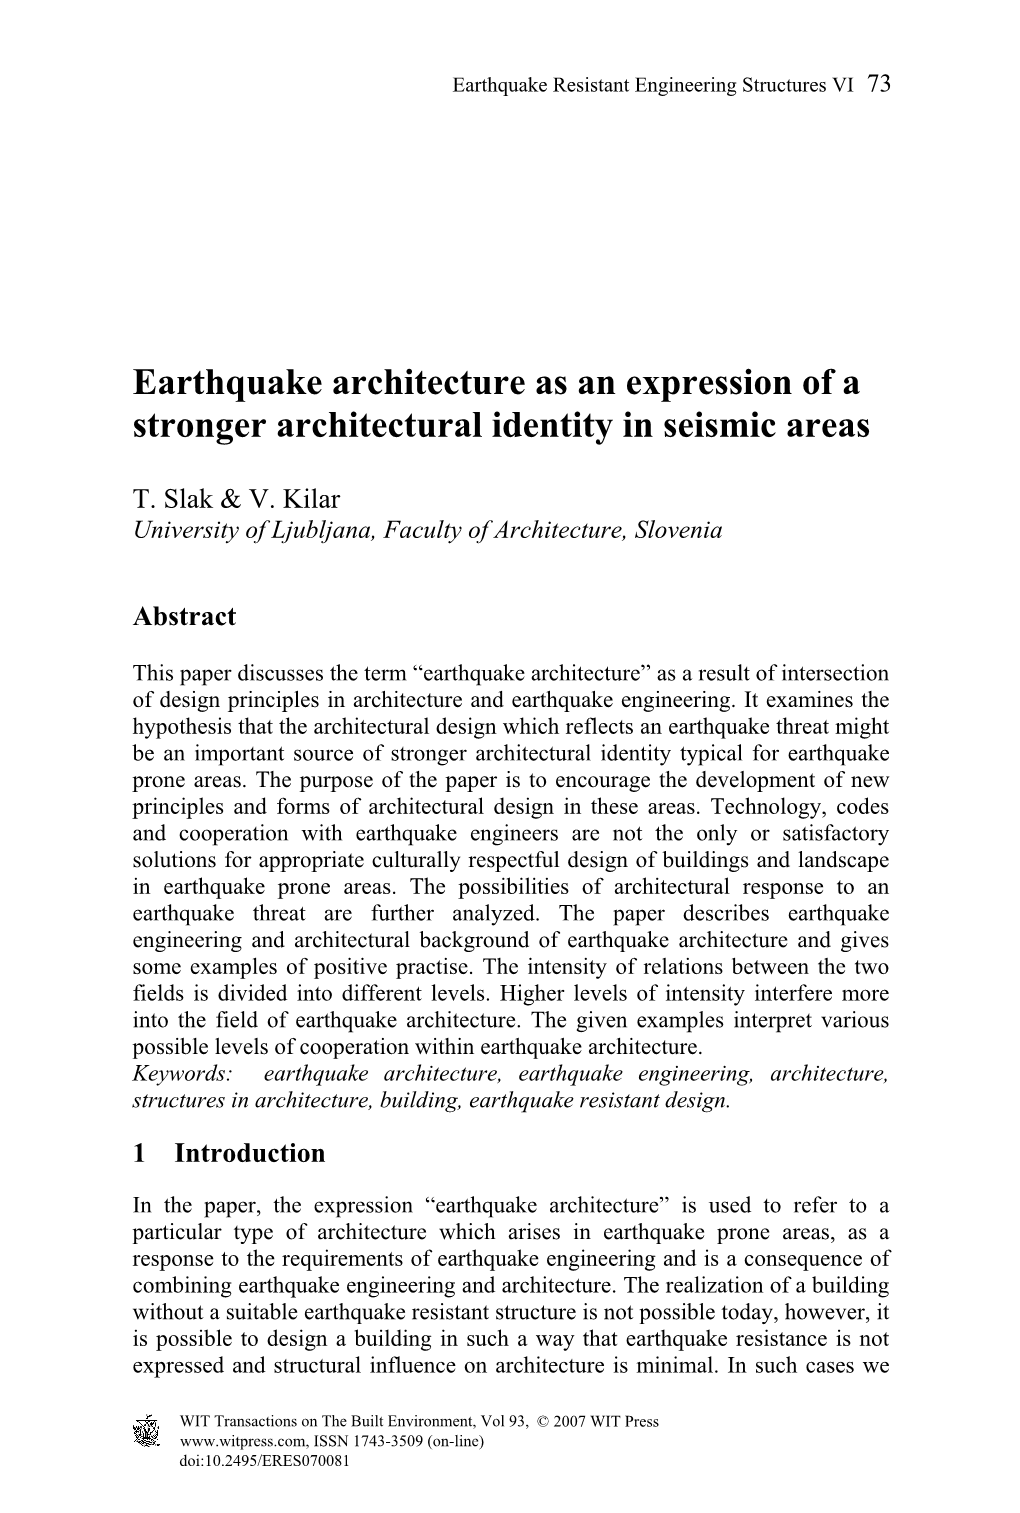 Earthquake Architecture As an Expression of a Stronger Architectural Identity in Seismic Areas